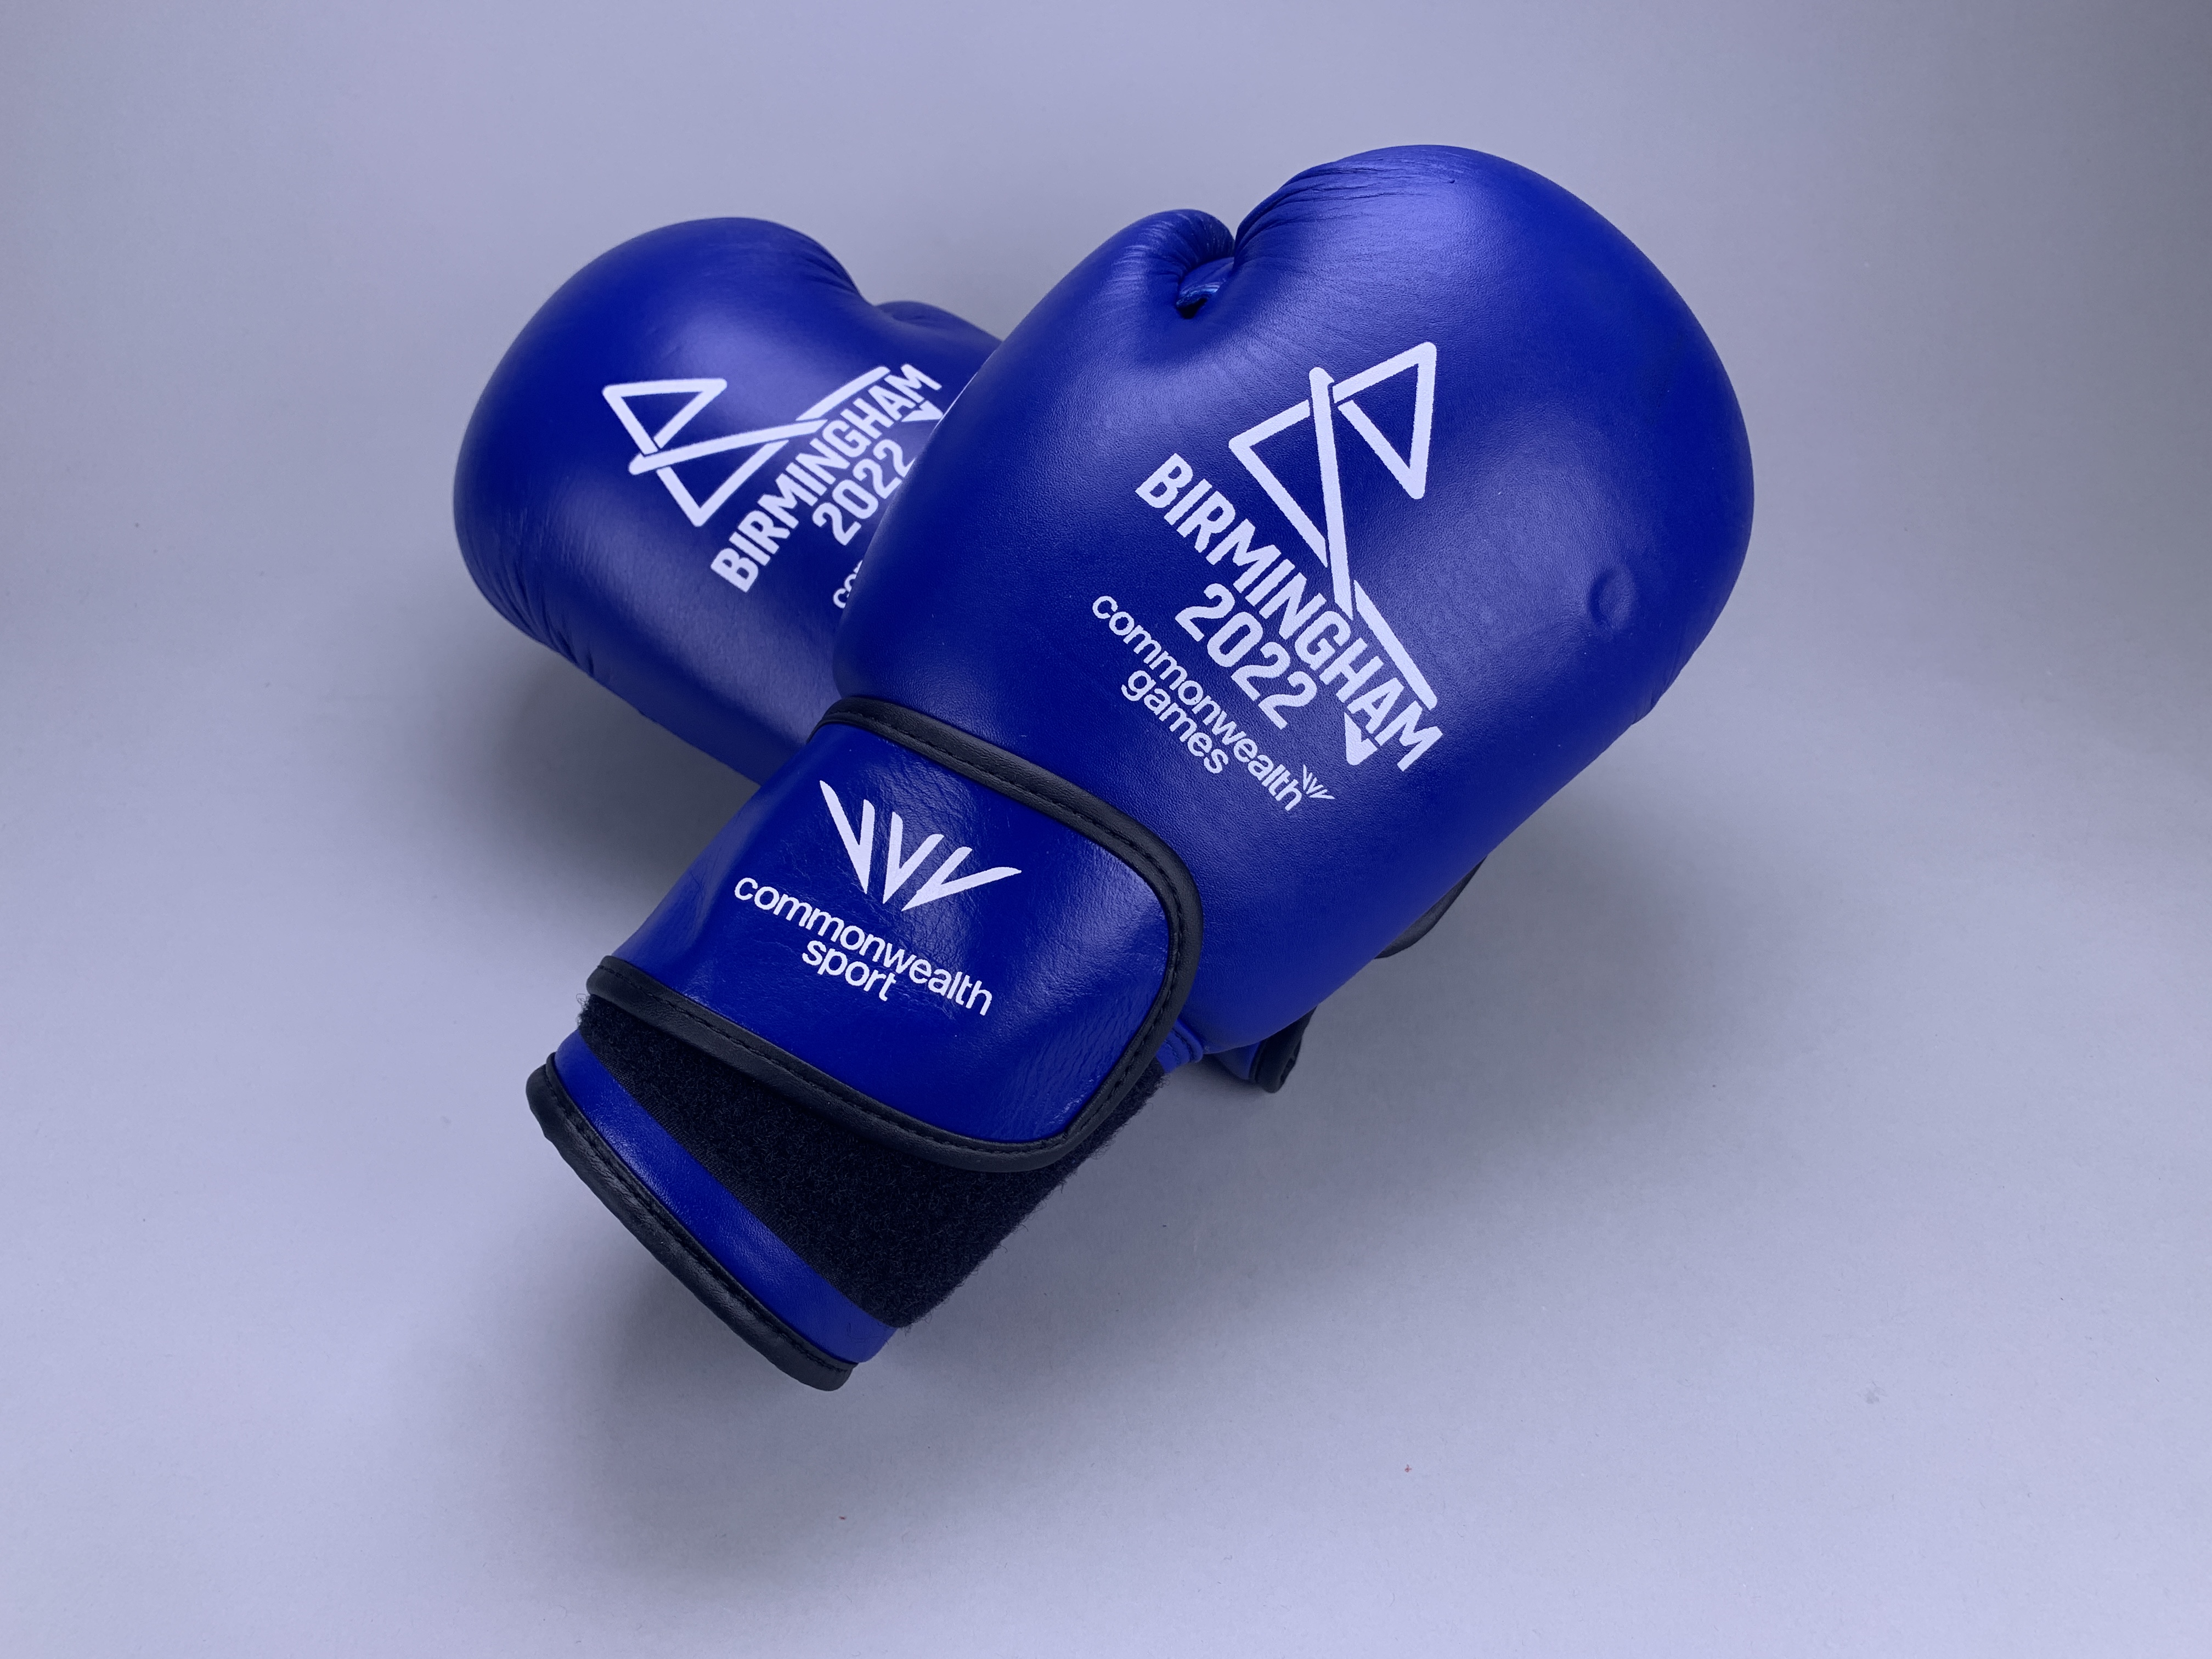 B2022 Men's Middleweight Gold Medal Bout Boxing Glove Right - Callum Peters